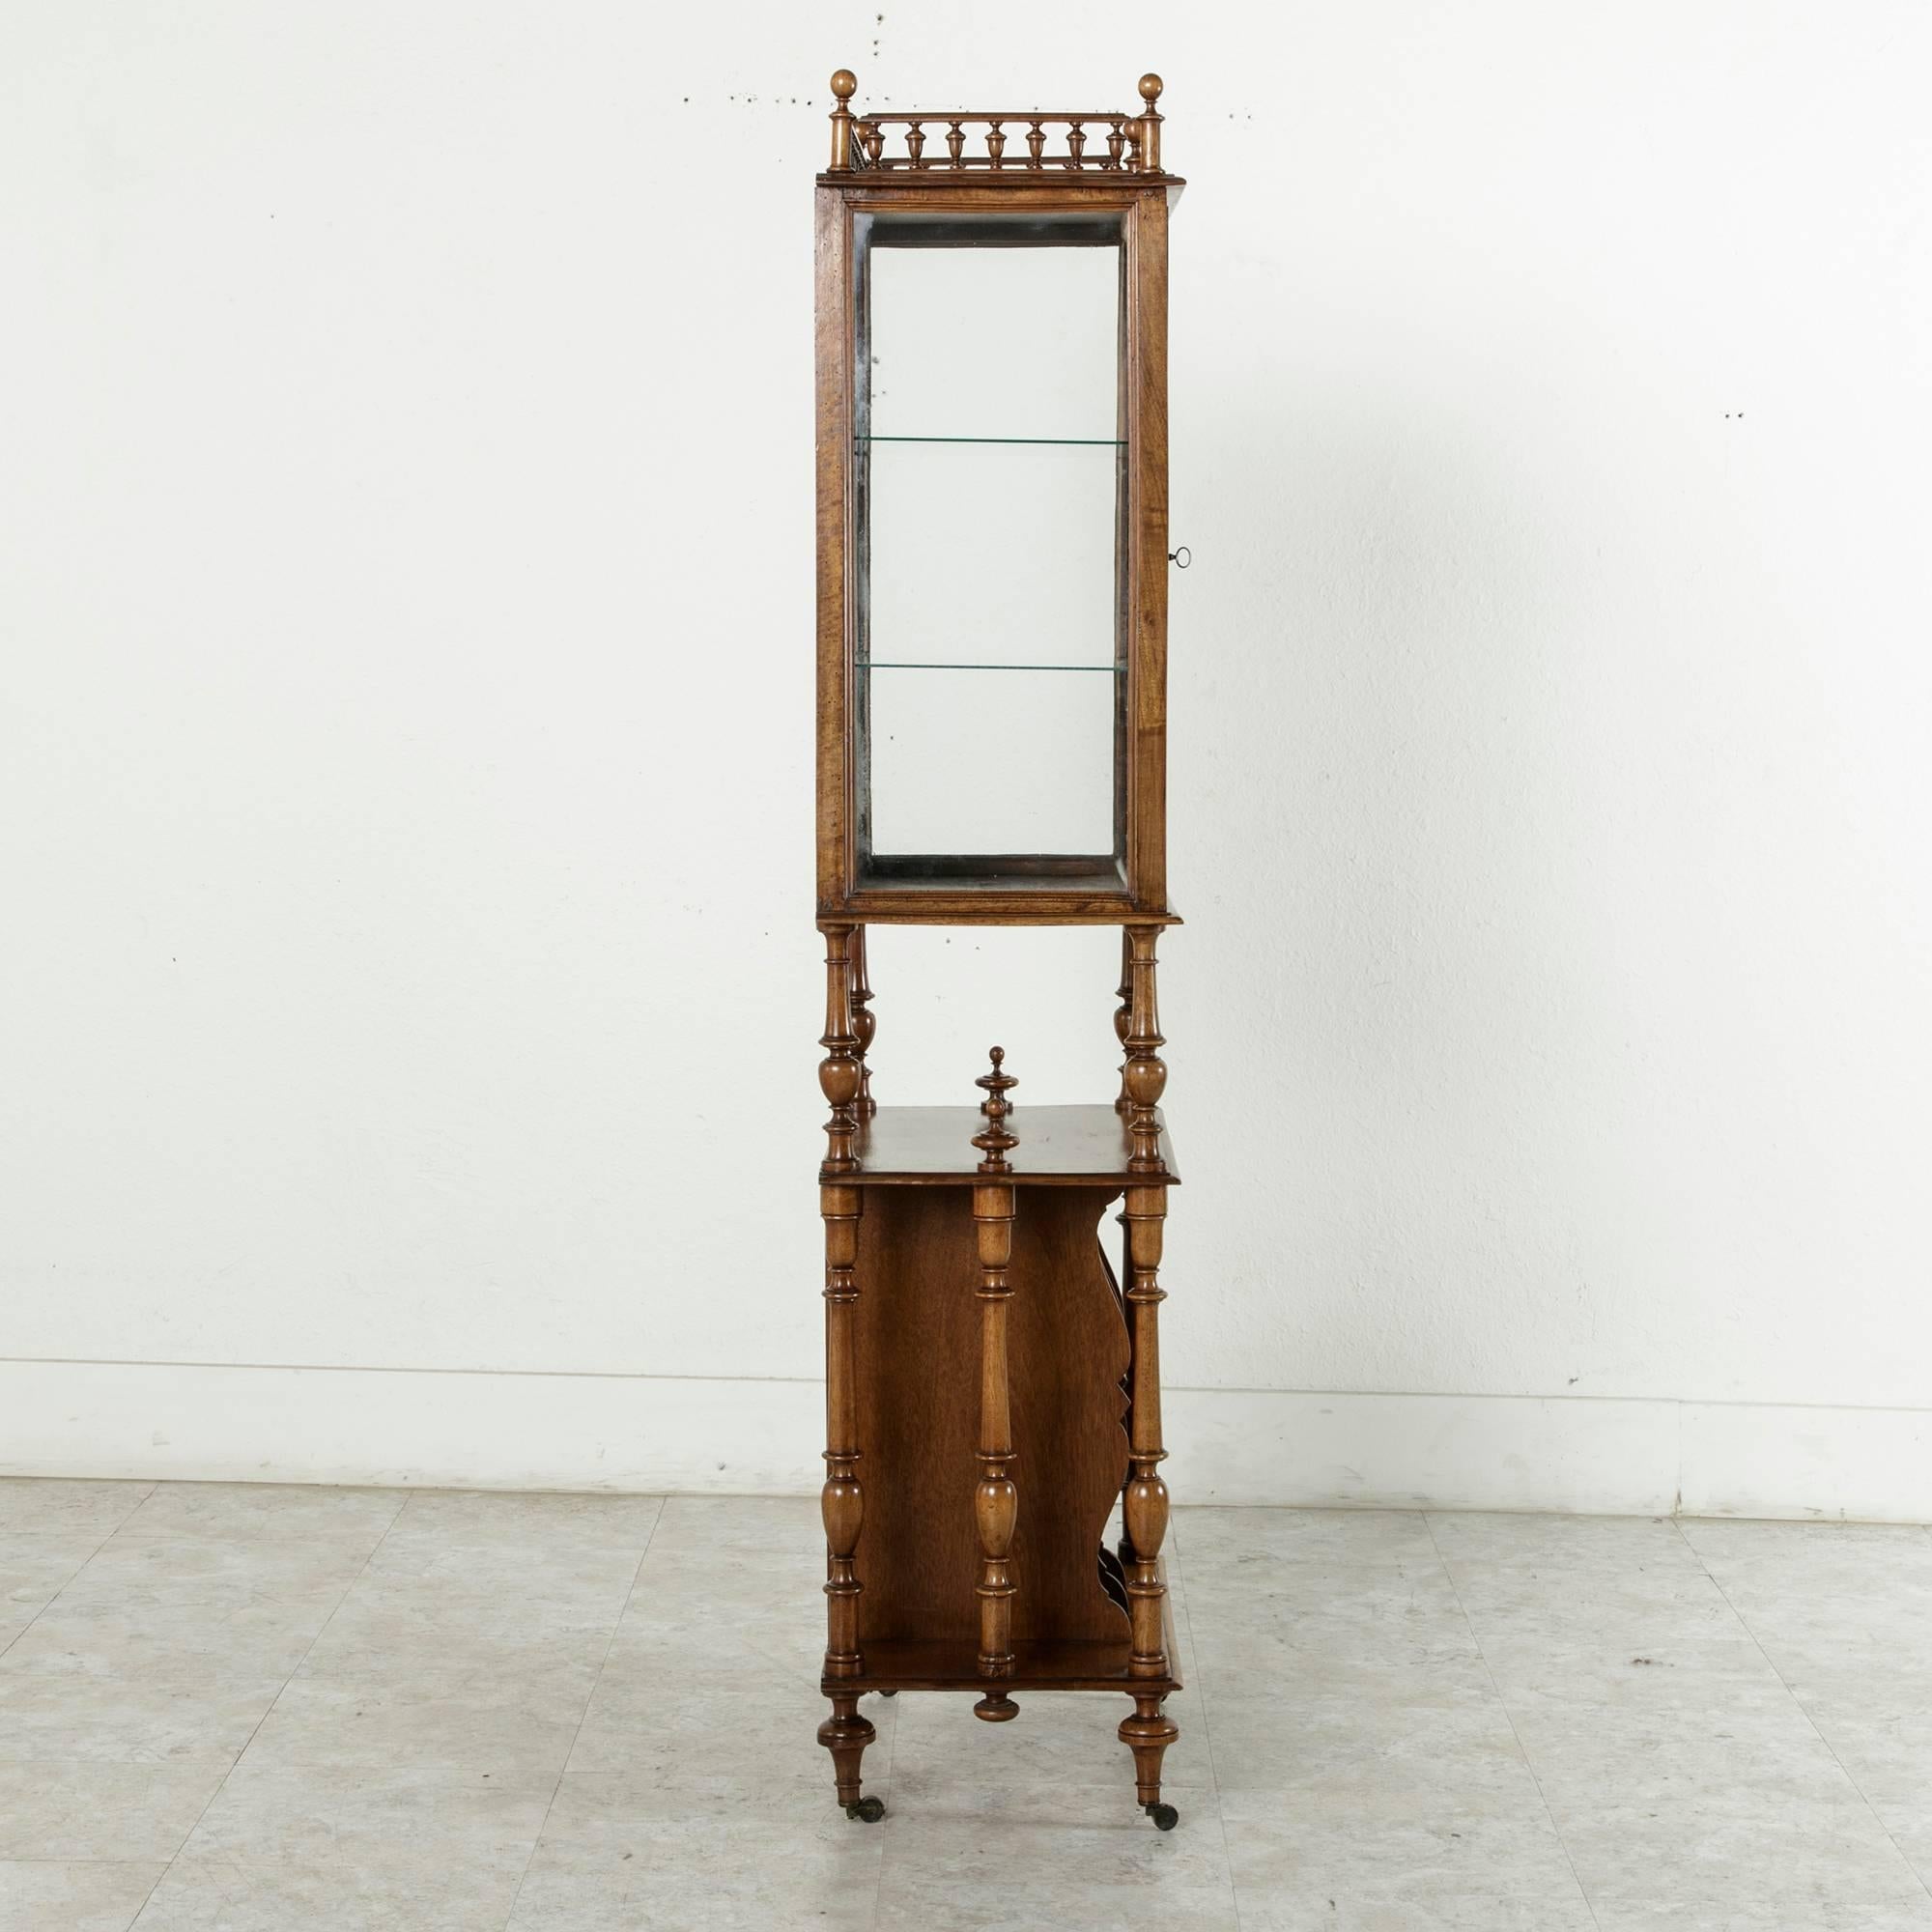 Glass Late 19th Century French Hand-Carved Walnut Music Cabinet or Display Vitrine